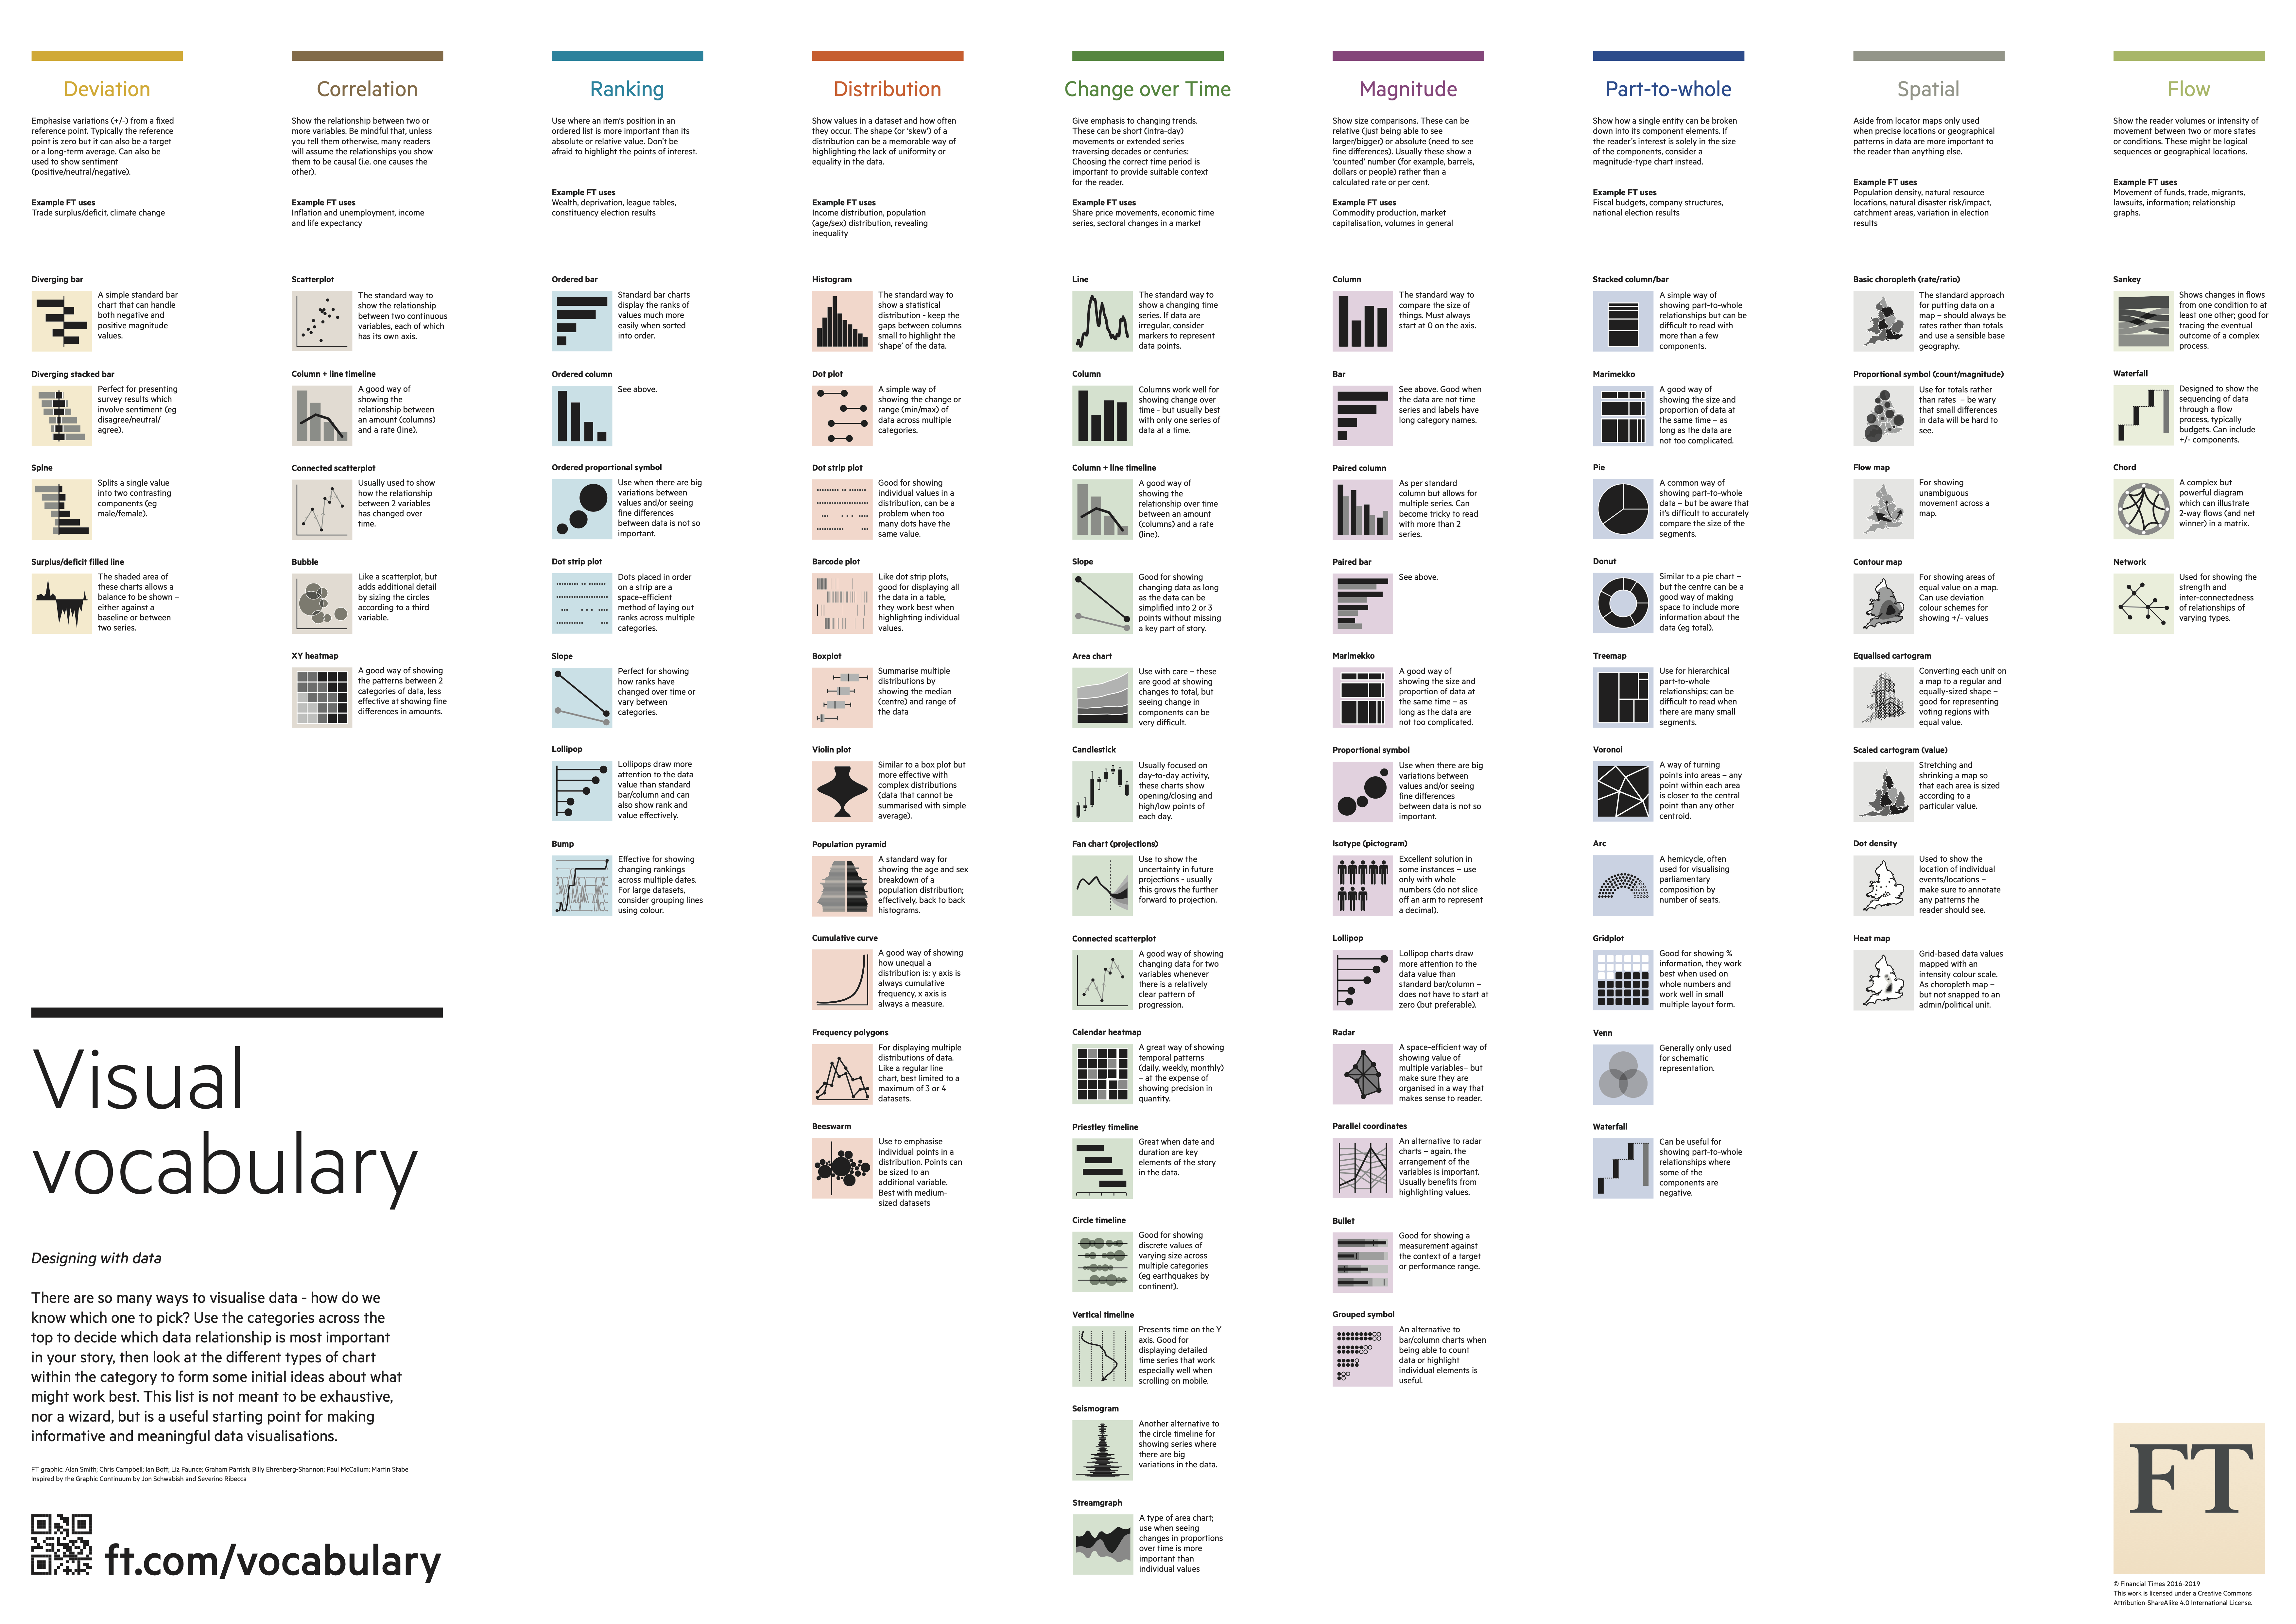 The Visual Vocabulary, with many chart icons grouped into 9 categories